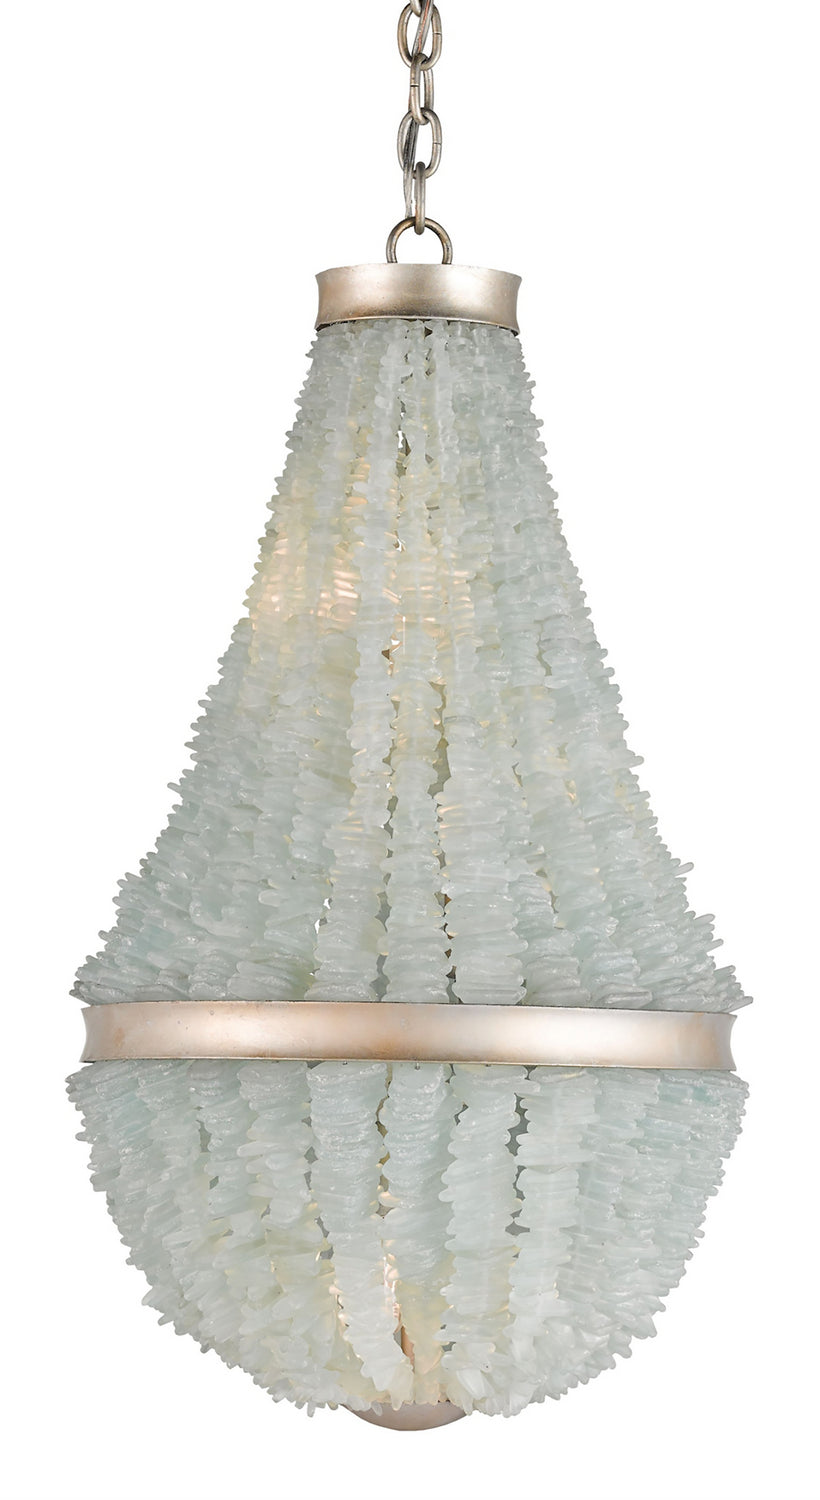 Three Light Chandelier from the Platea collection in Contemporary Silver Leaf/Seaglass finish